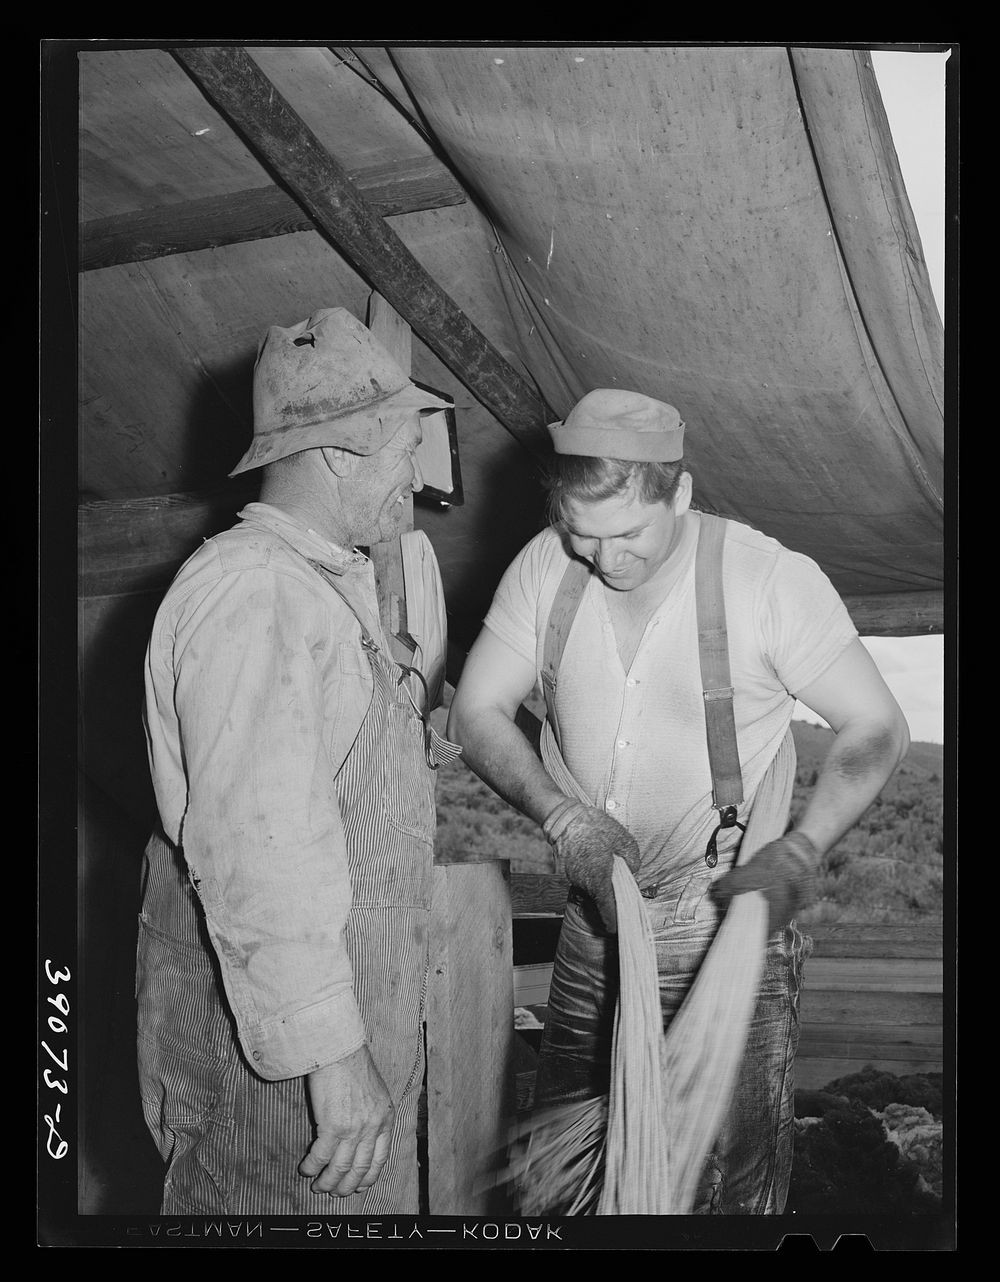 Sheep shearers on ranch in Malheur County, Oregon. The cord around the waist of man on right is used to sew up the sacks…